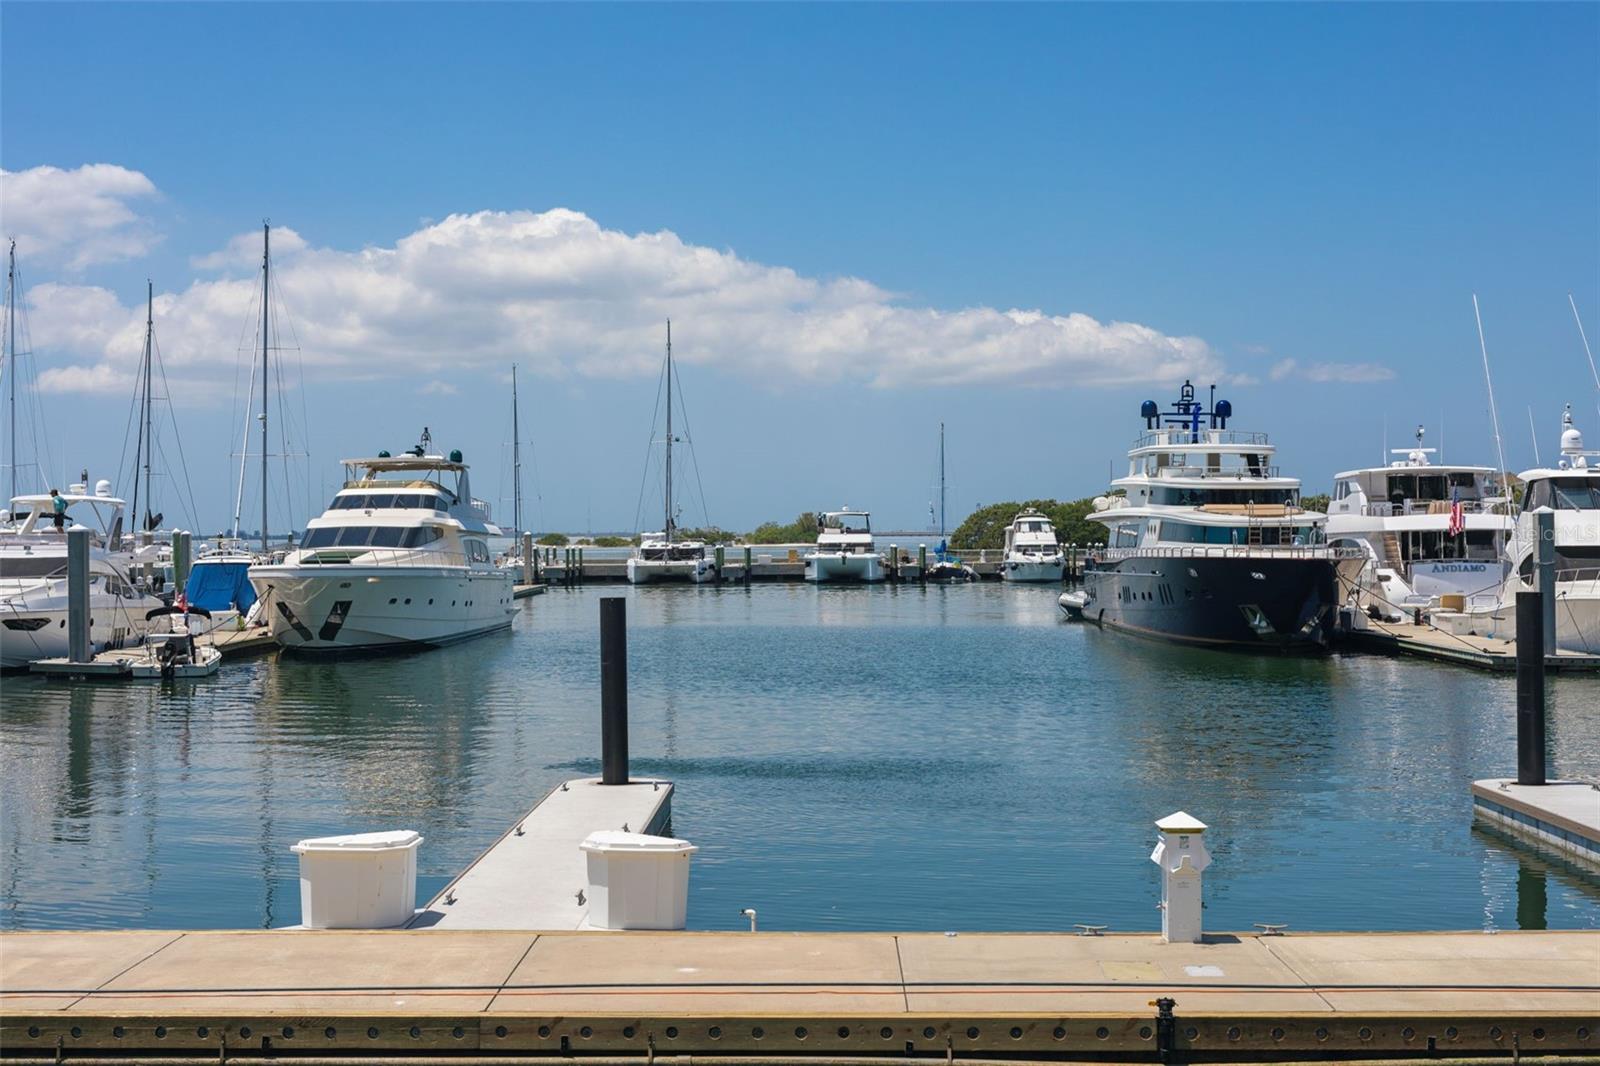 For security and privacy, there is not direct water access from the backyard, but you can dock a boat directly behind on the walking dock to accommodate guests or day trips.